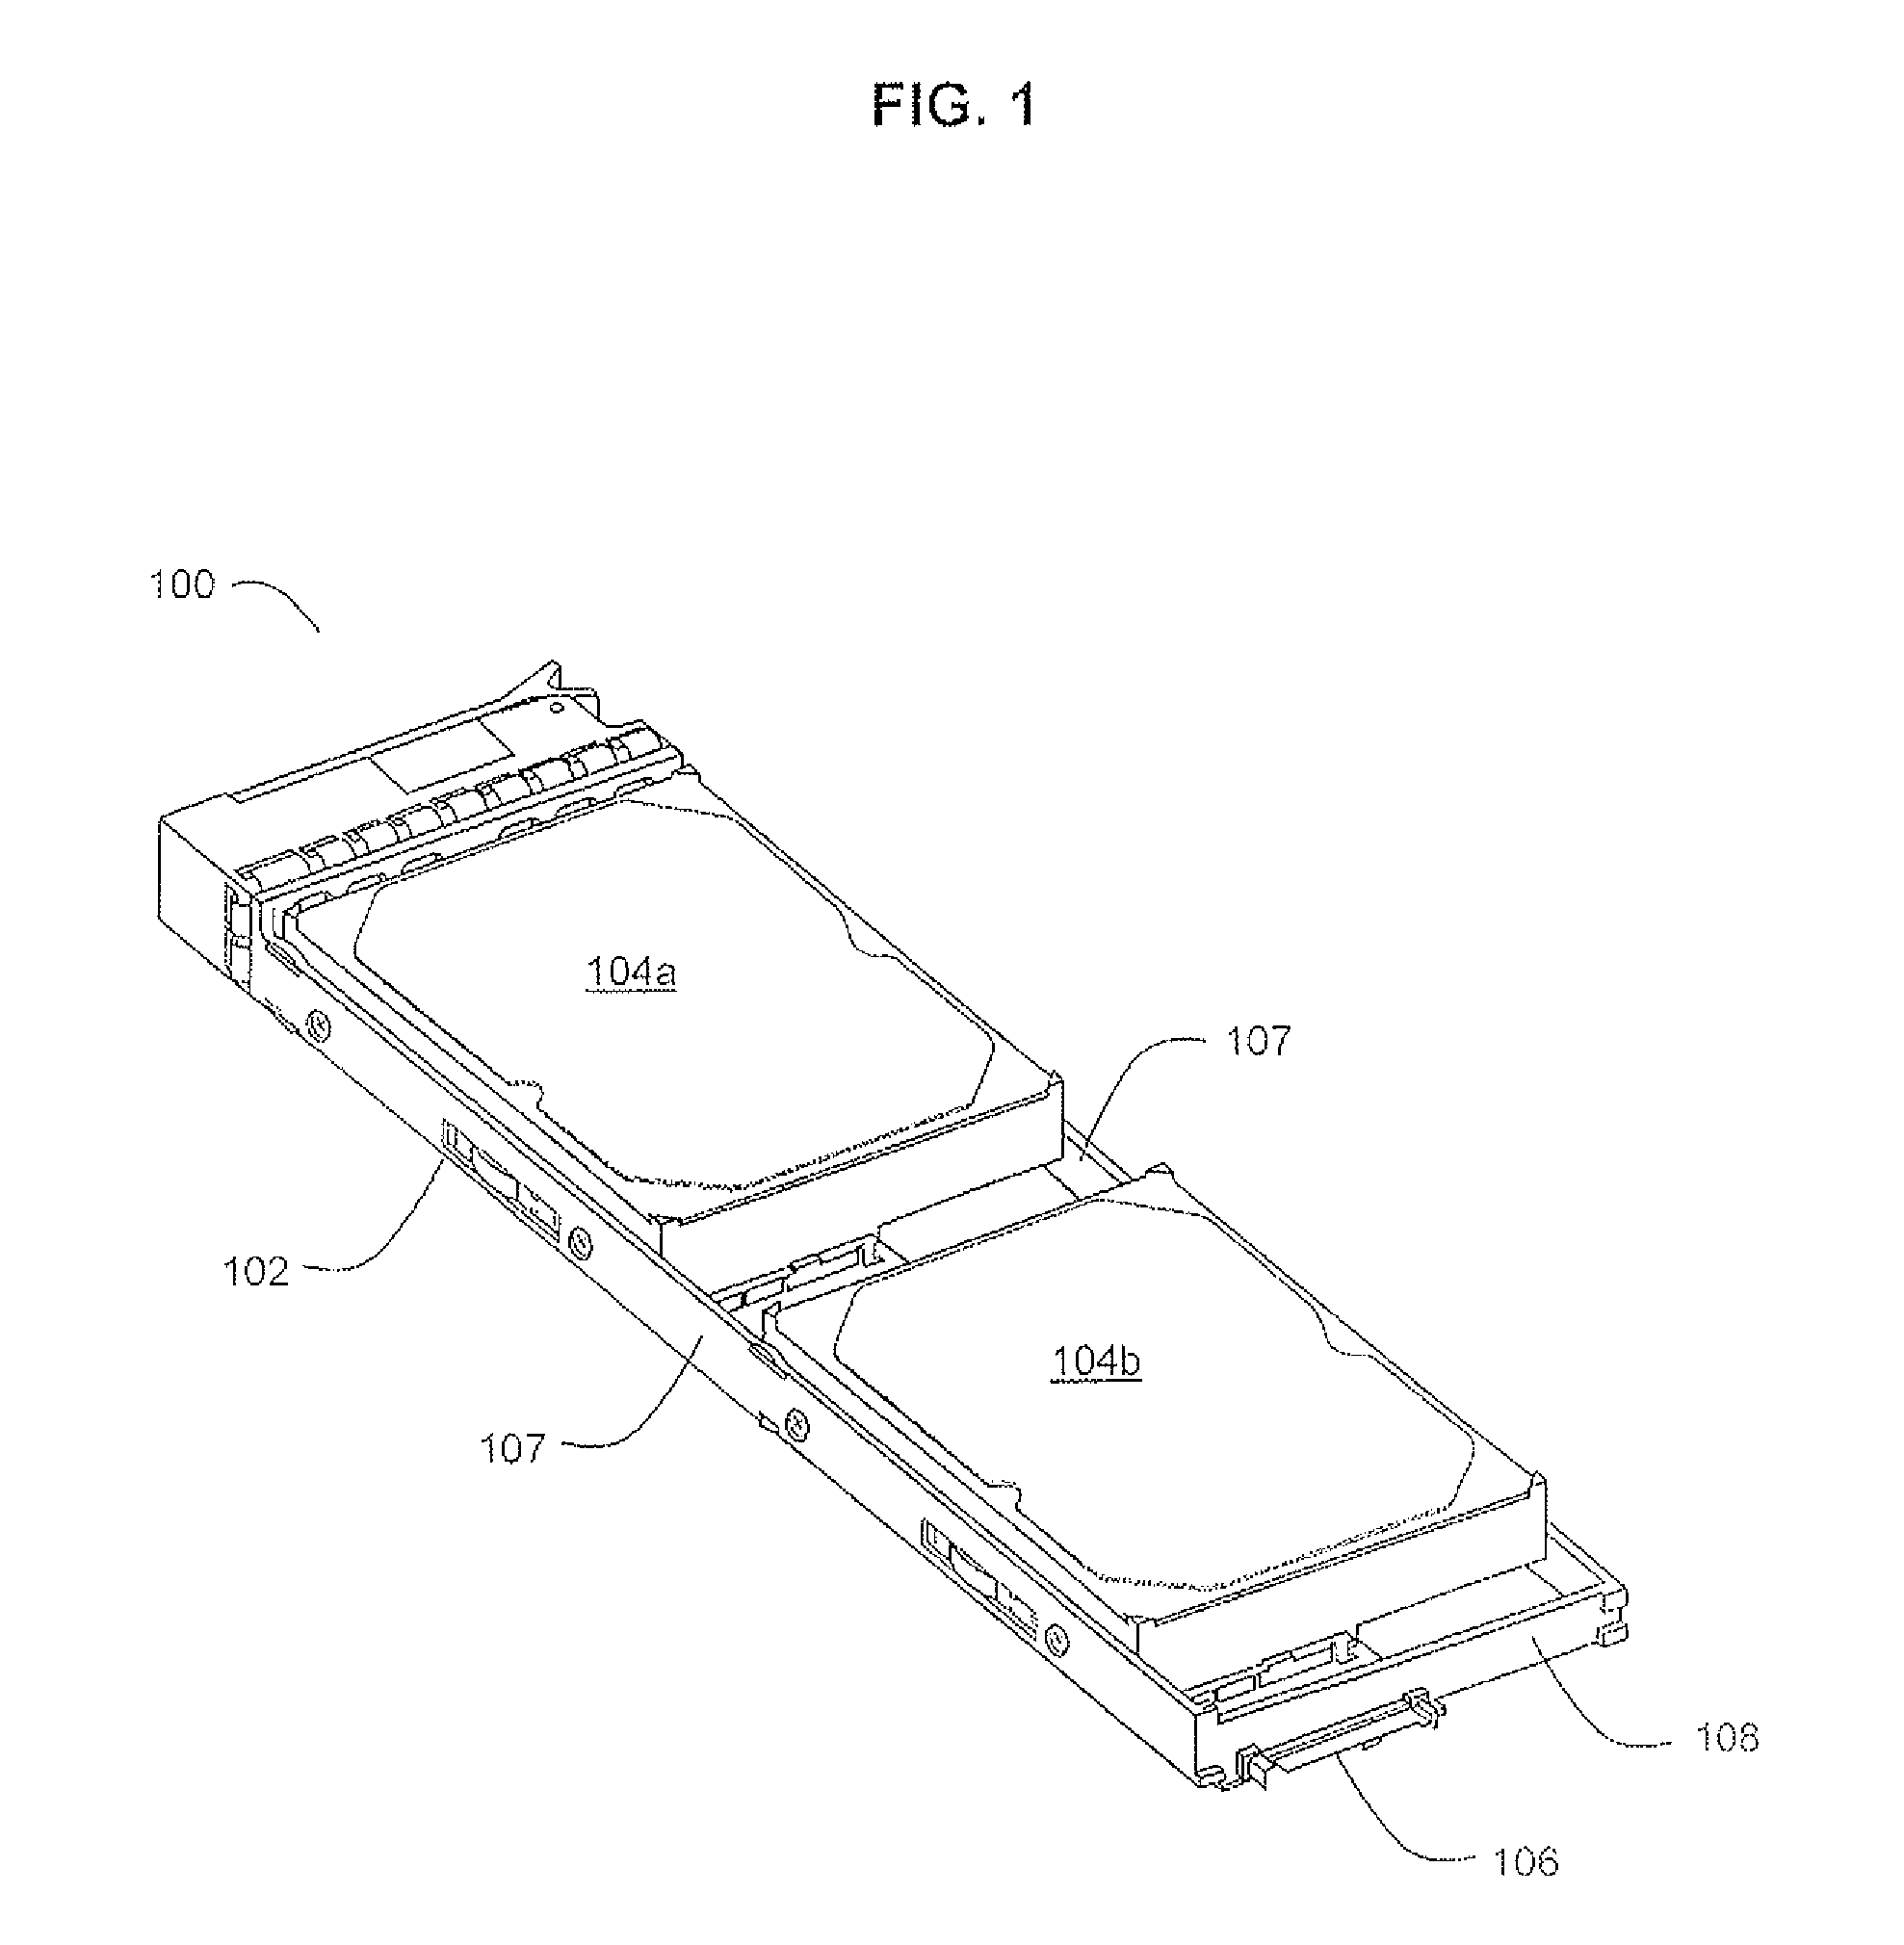 Incorporation of two or more hard disk drives into a single drive carrier with a single midplane connector